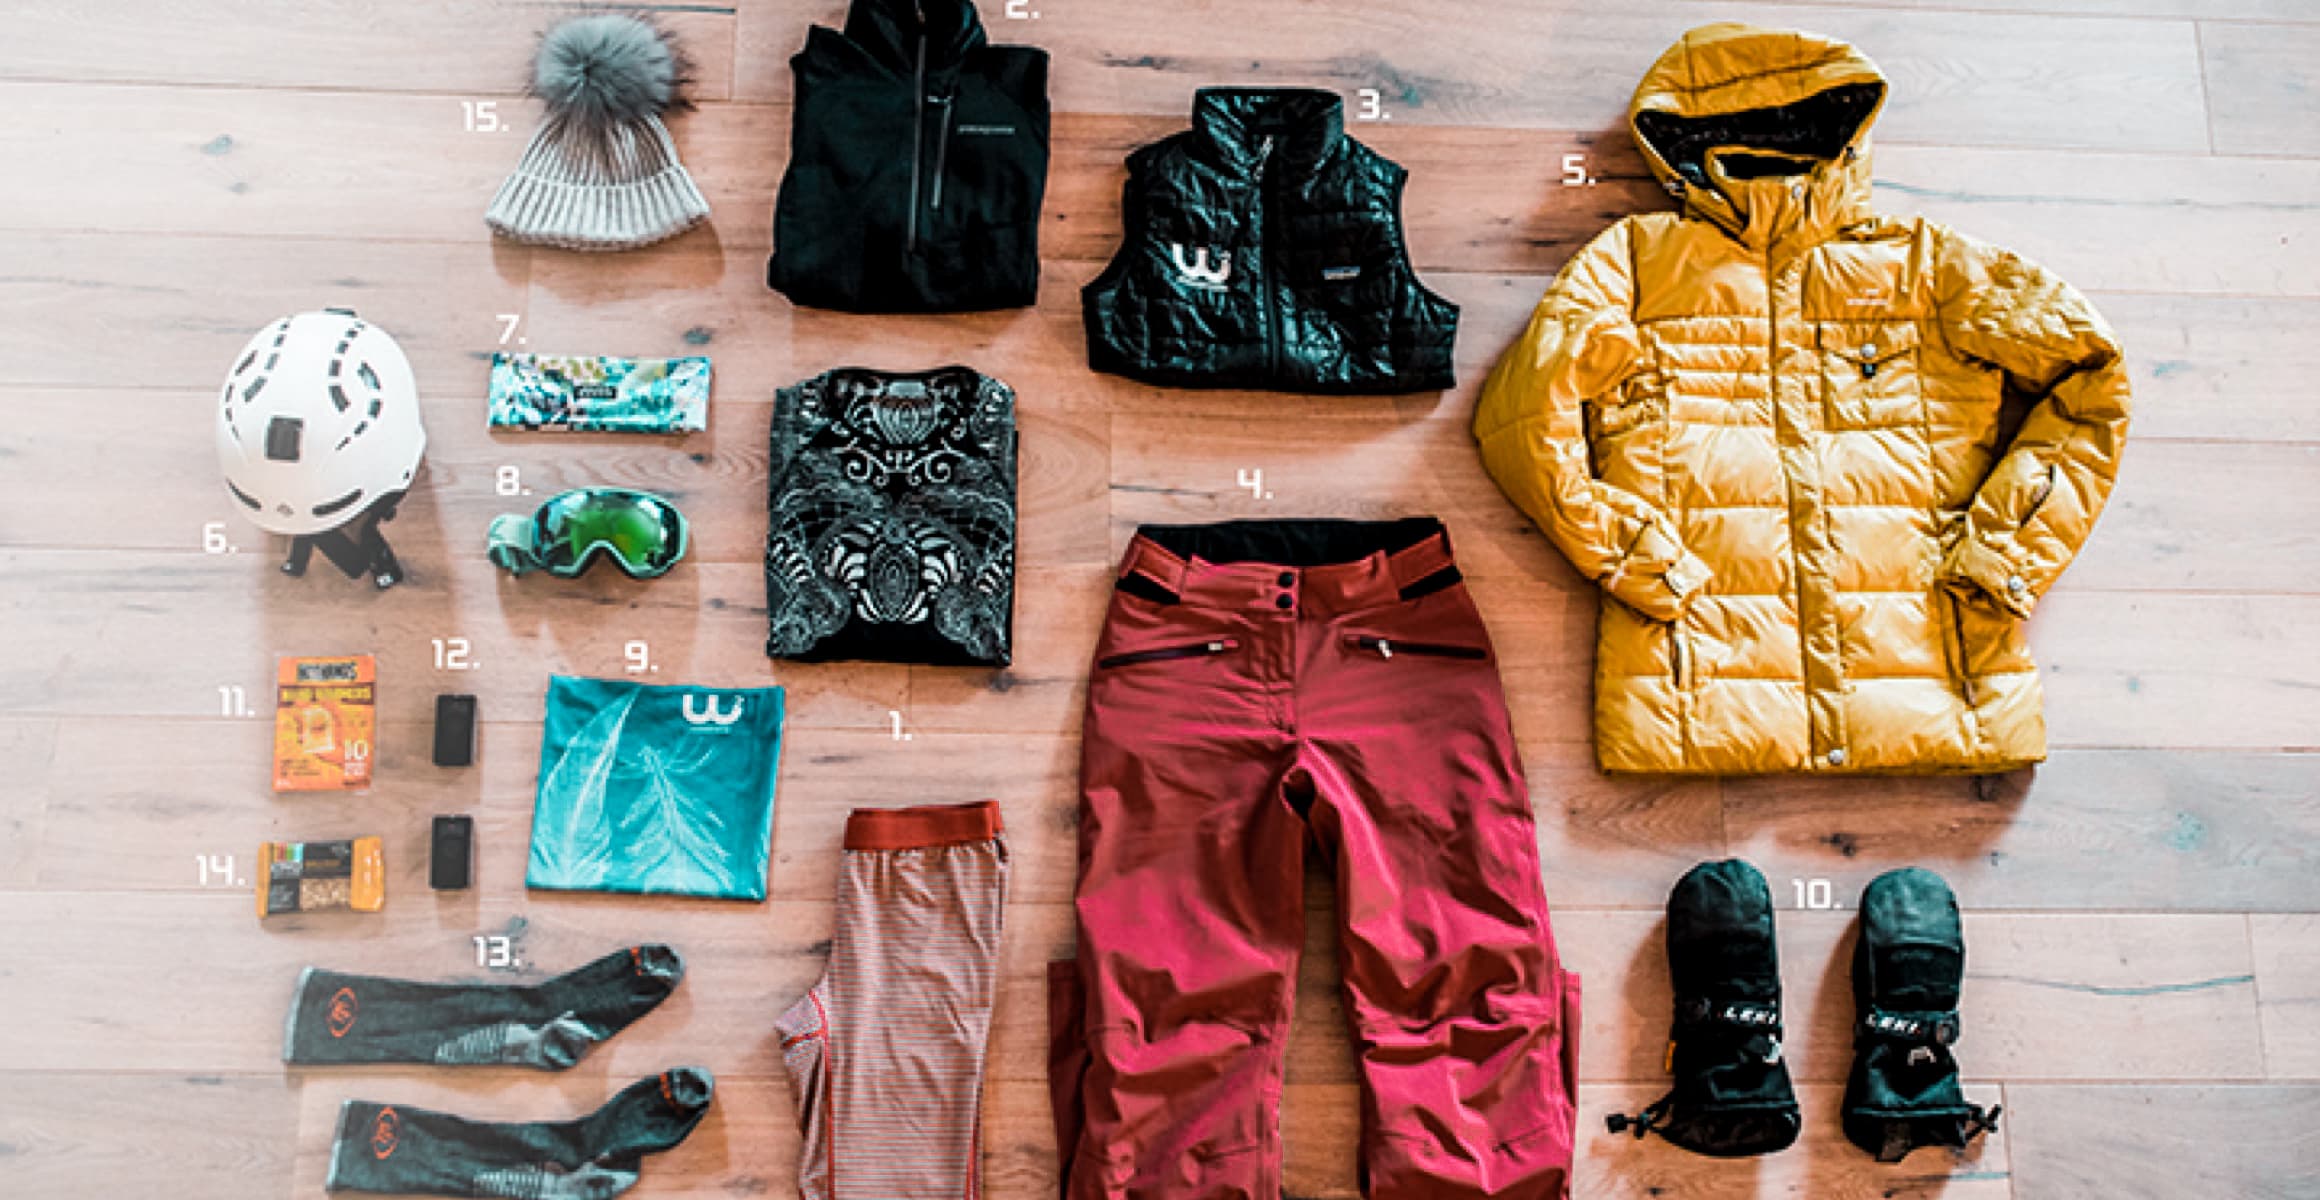 how to dress for skiing